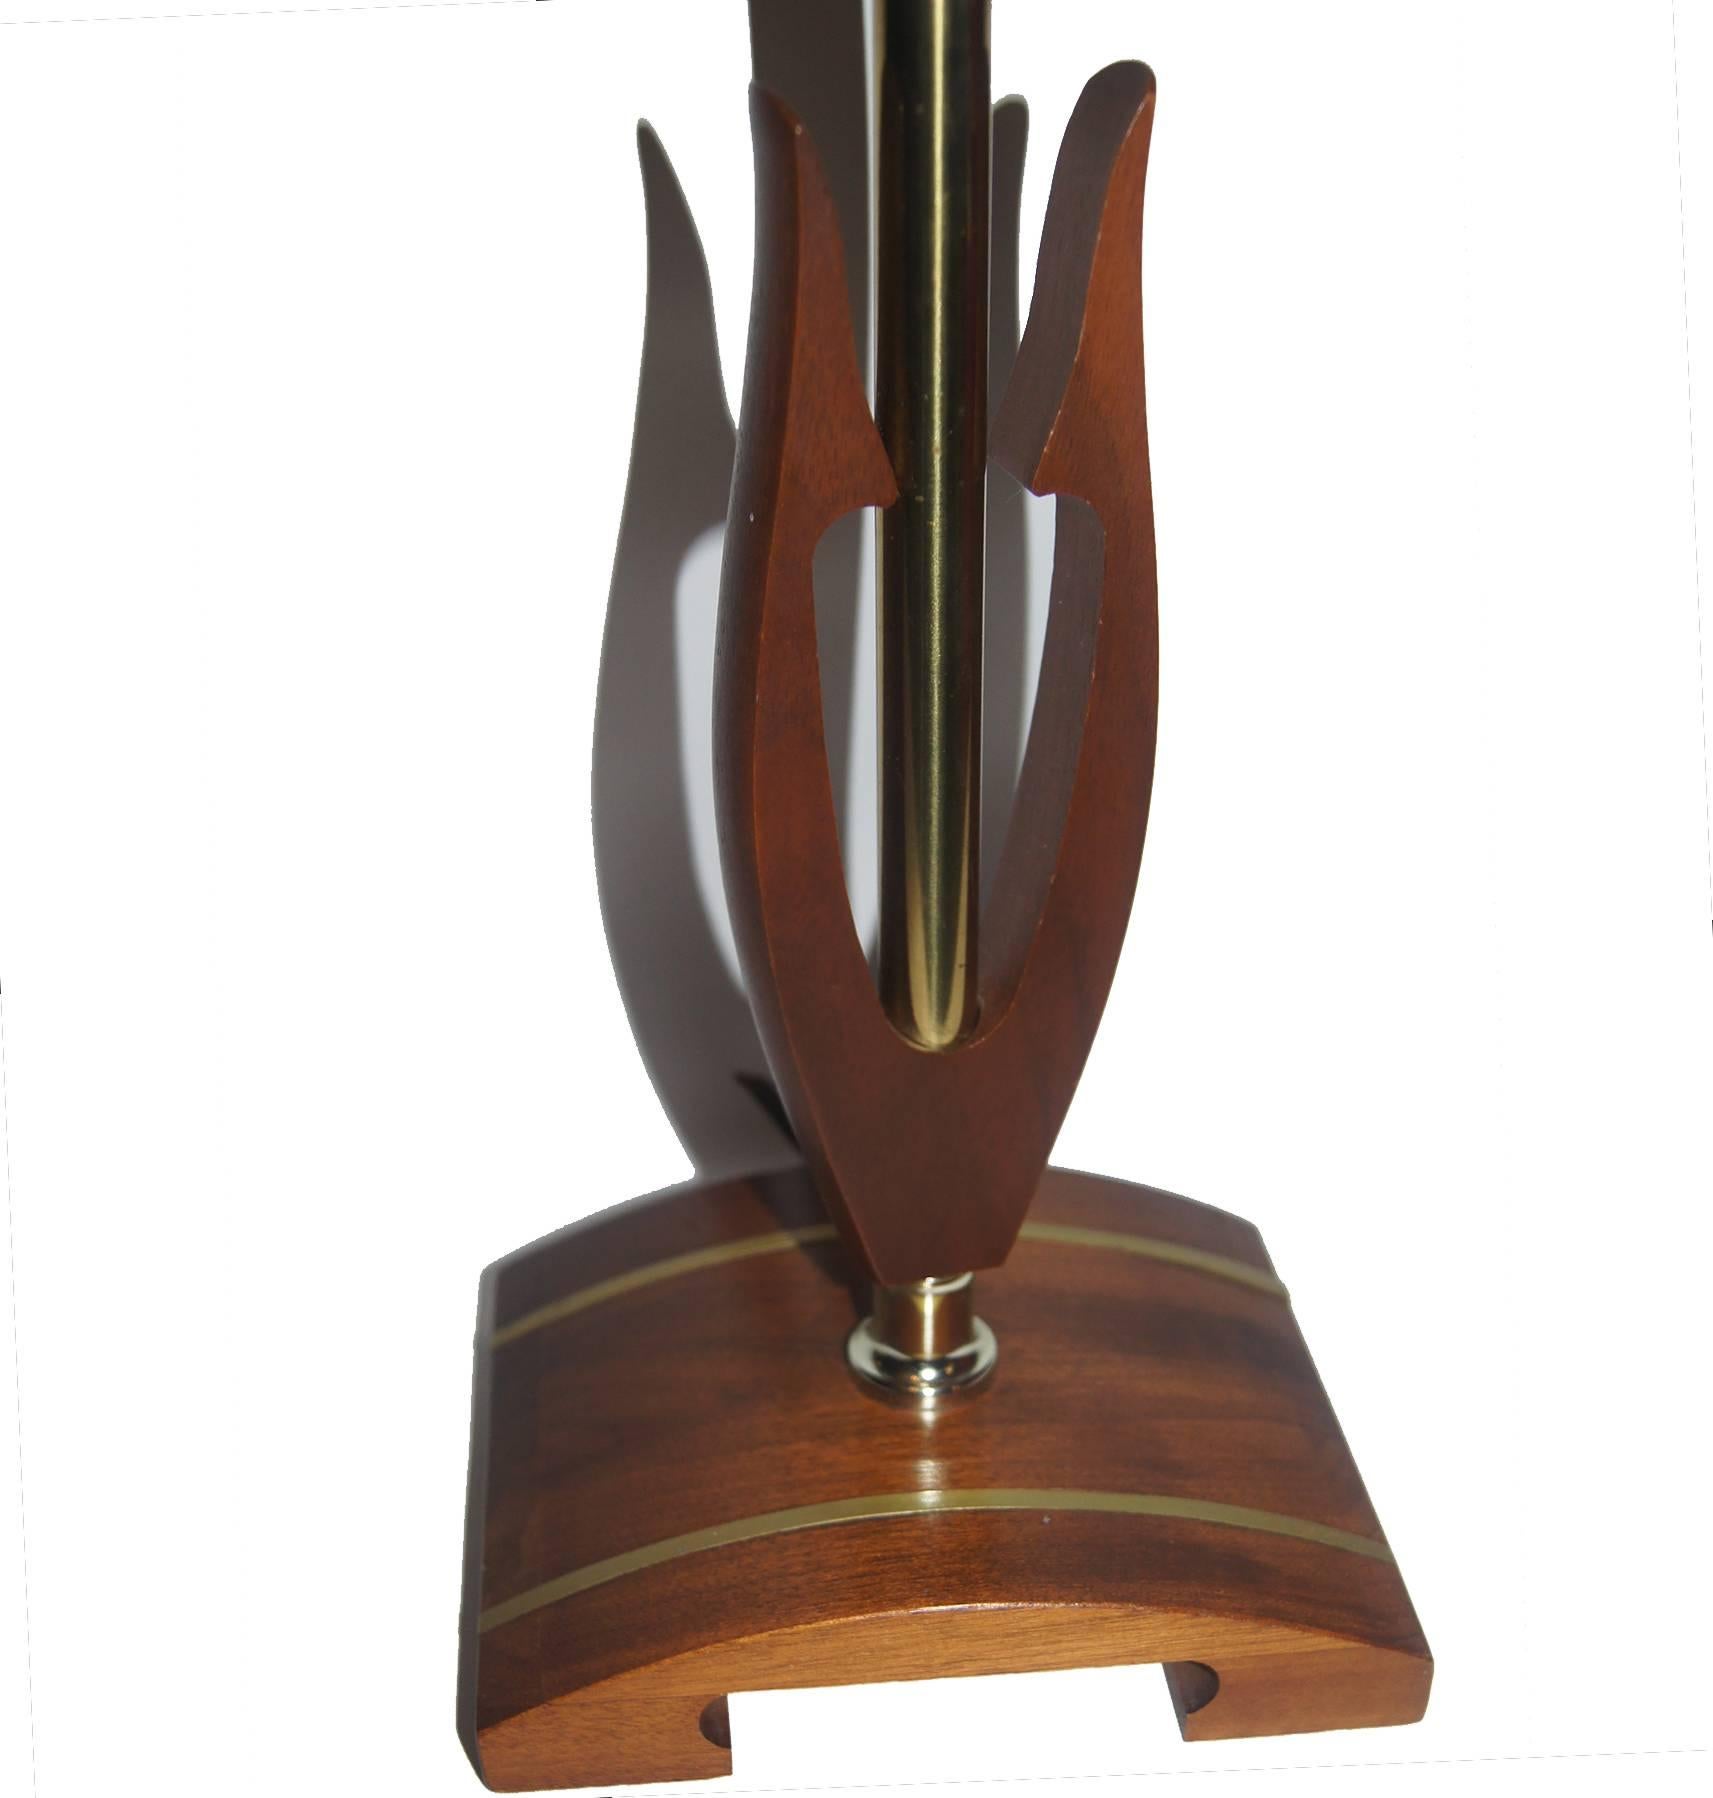 A midcentury Danish modern walnut desk lamp with stylized body and base with inset metal.

Measurements:
Height 19